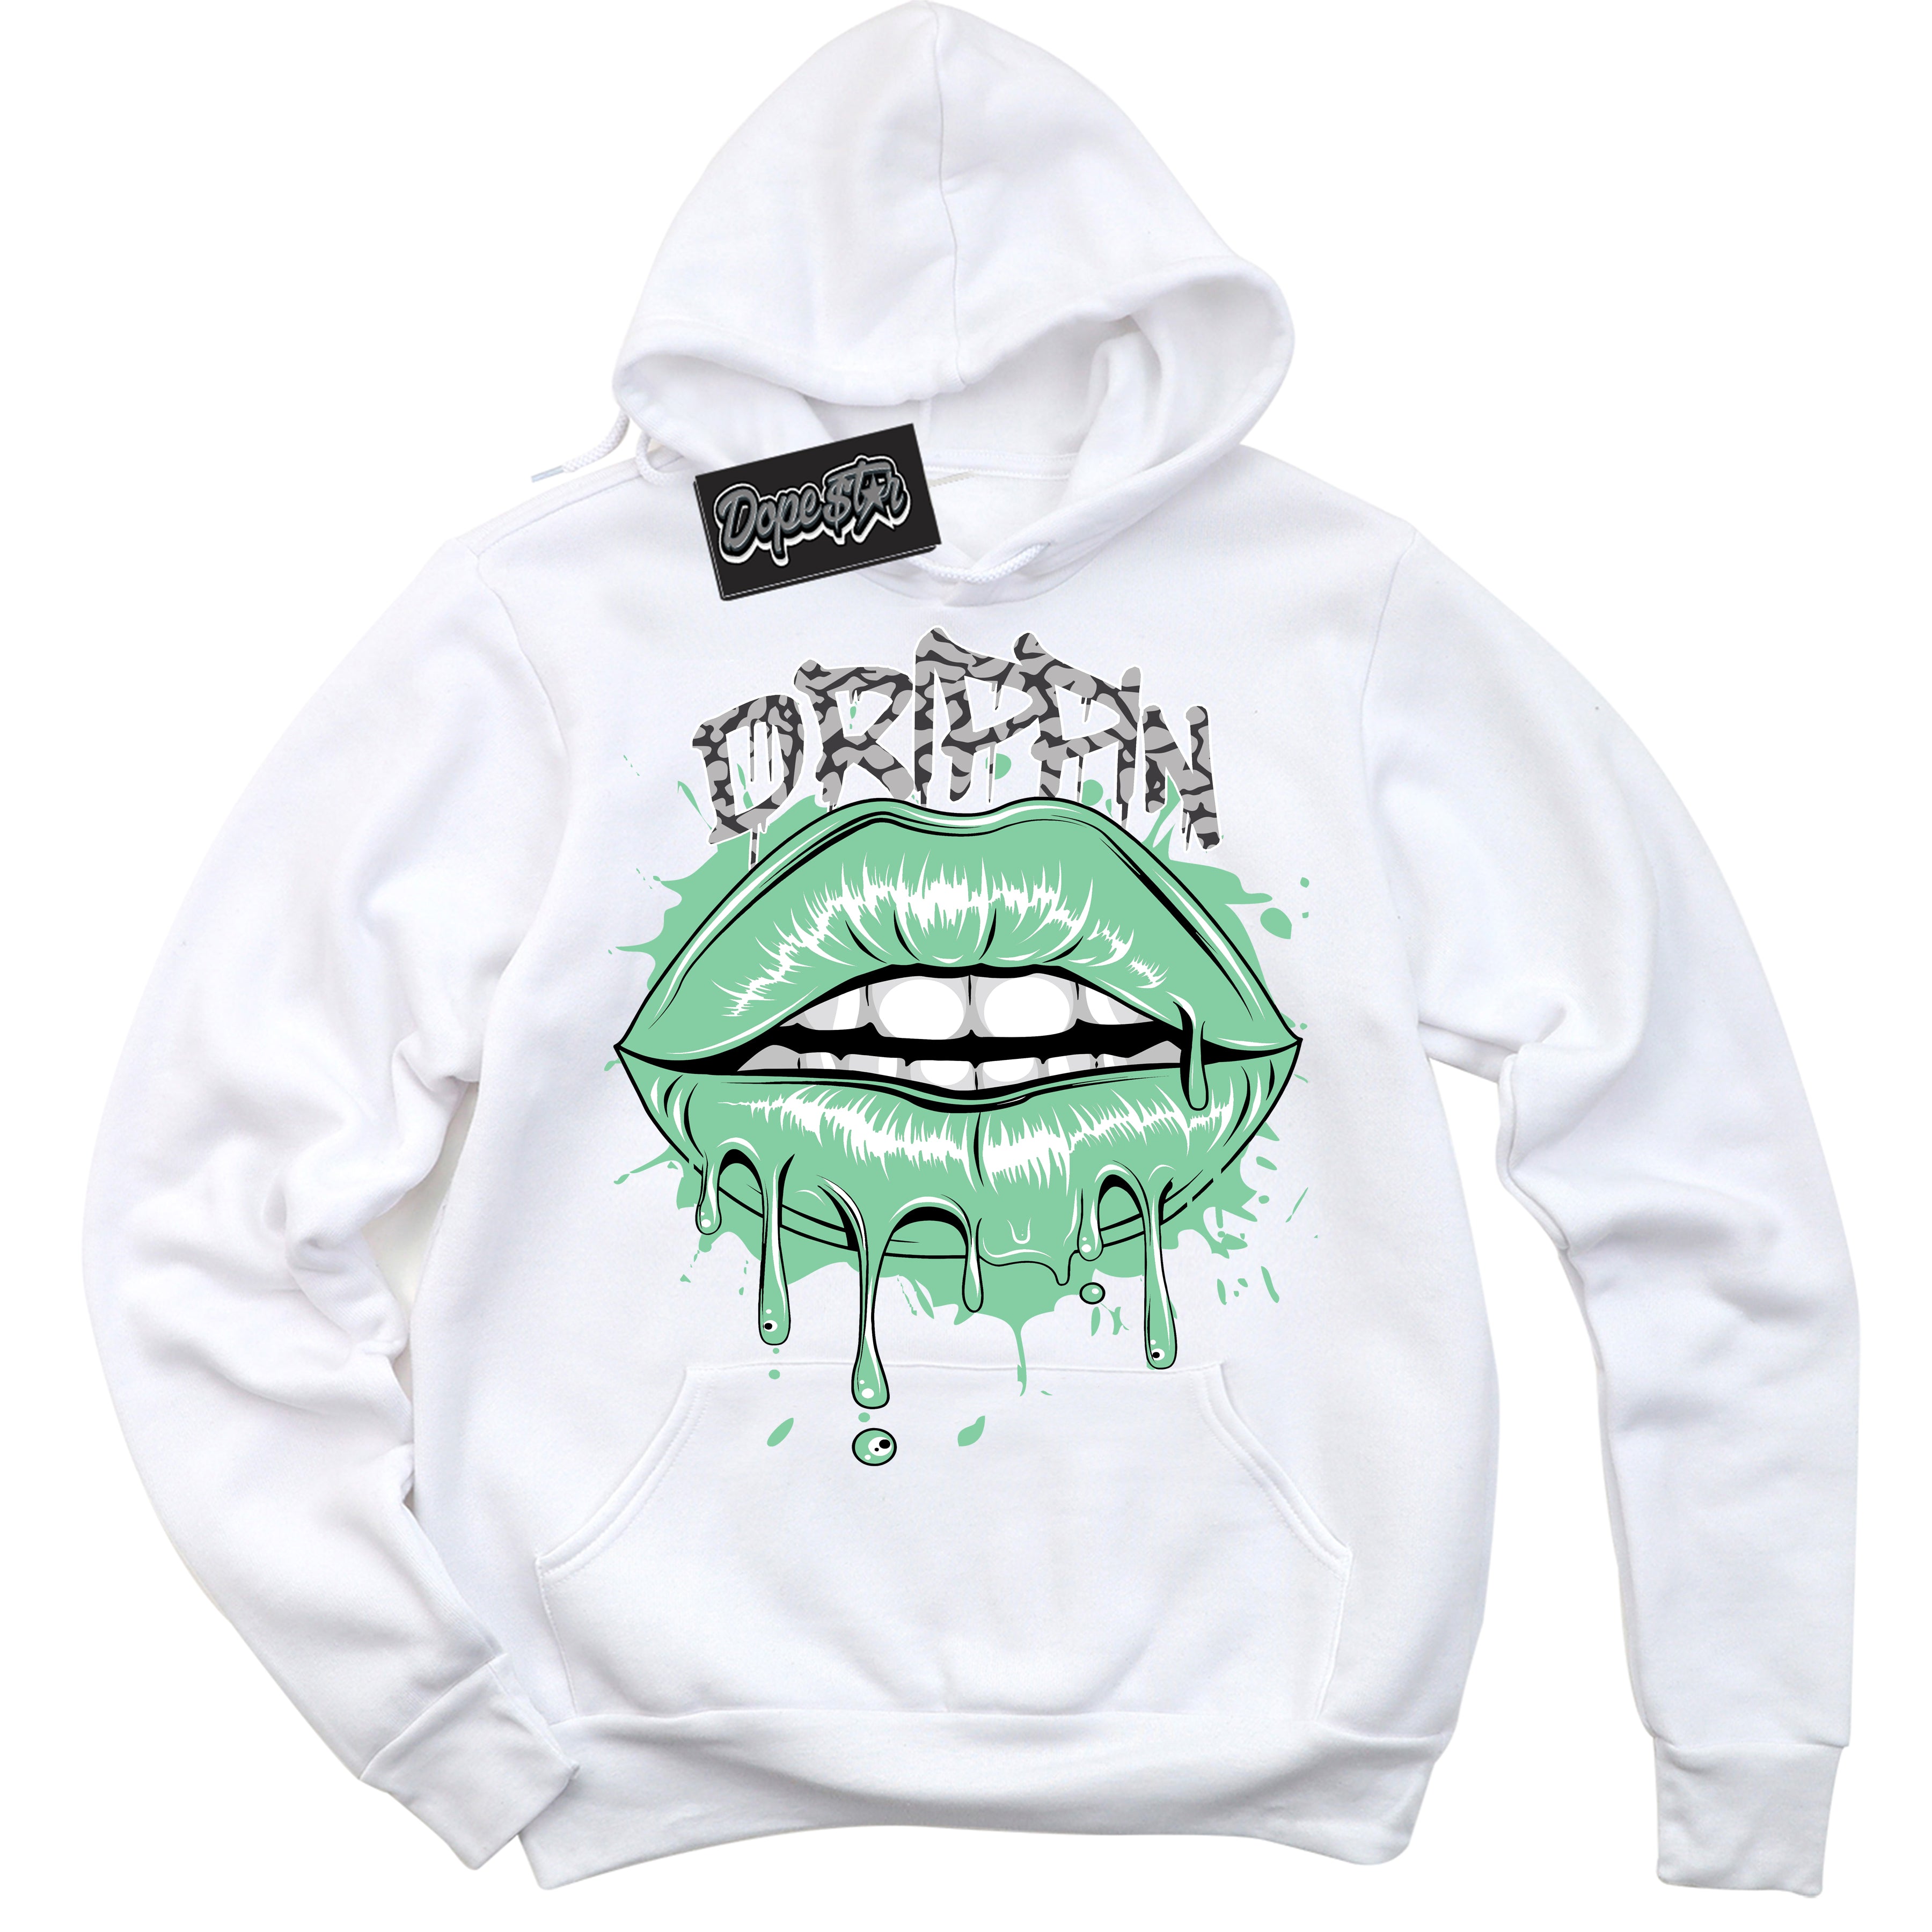 Cool White Graphic DopeStar Hoodie with “ Drippin “ print, that perfectly matches Green Glow 3s sneakers